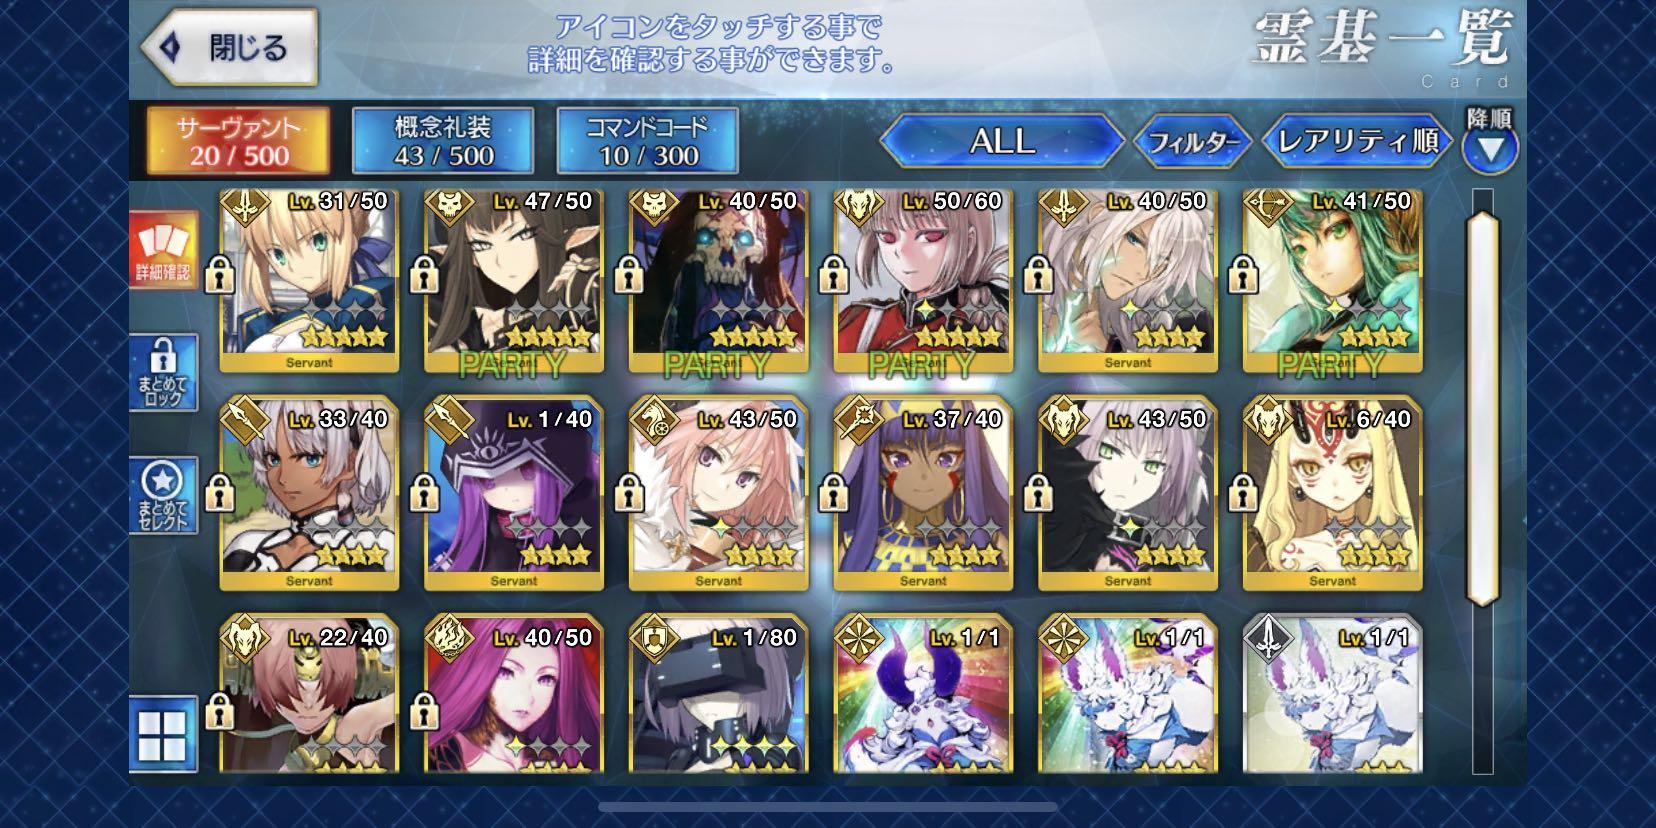 Fate Grand Order Fgo Jp Server Endgame Account For Sale Or Swap With Na Account Video Gaming Video Games On Carousell